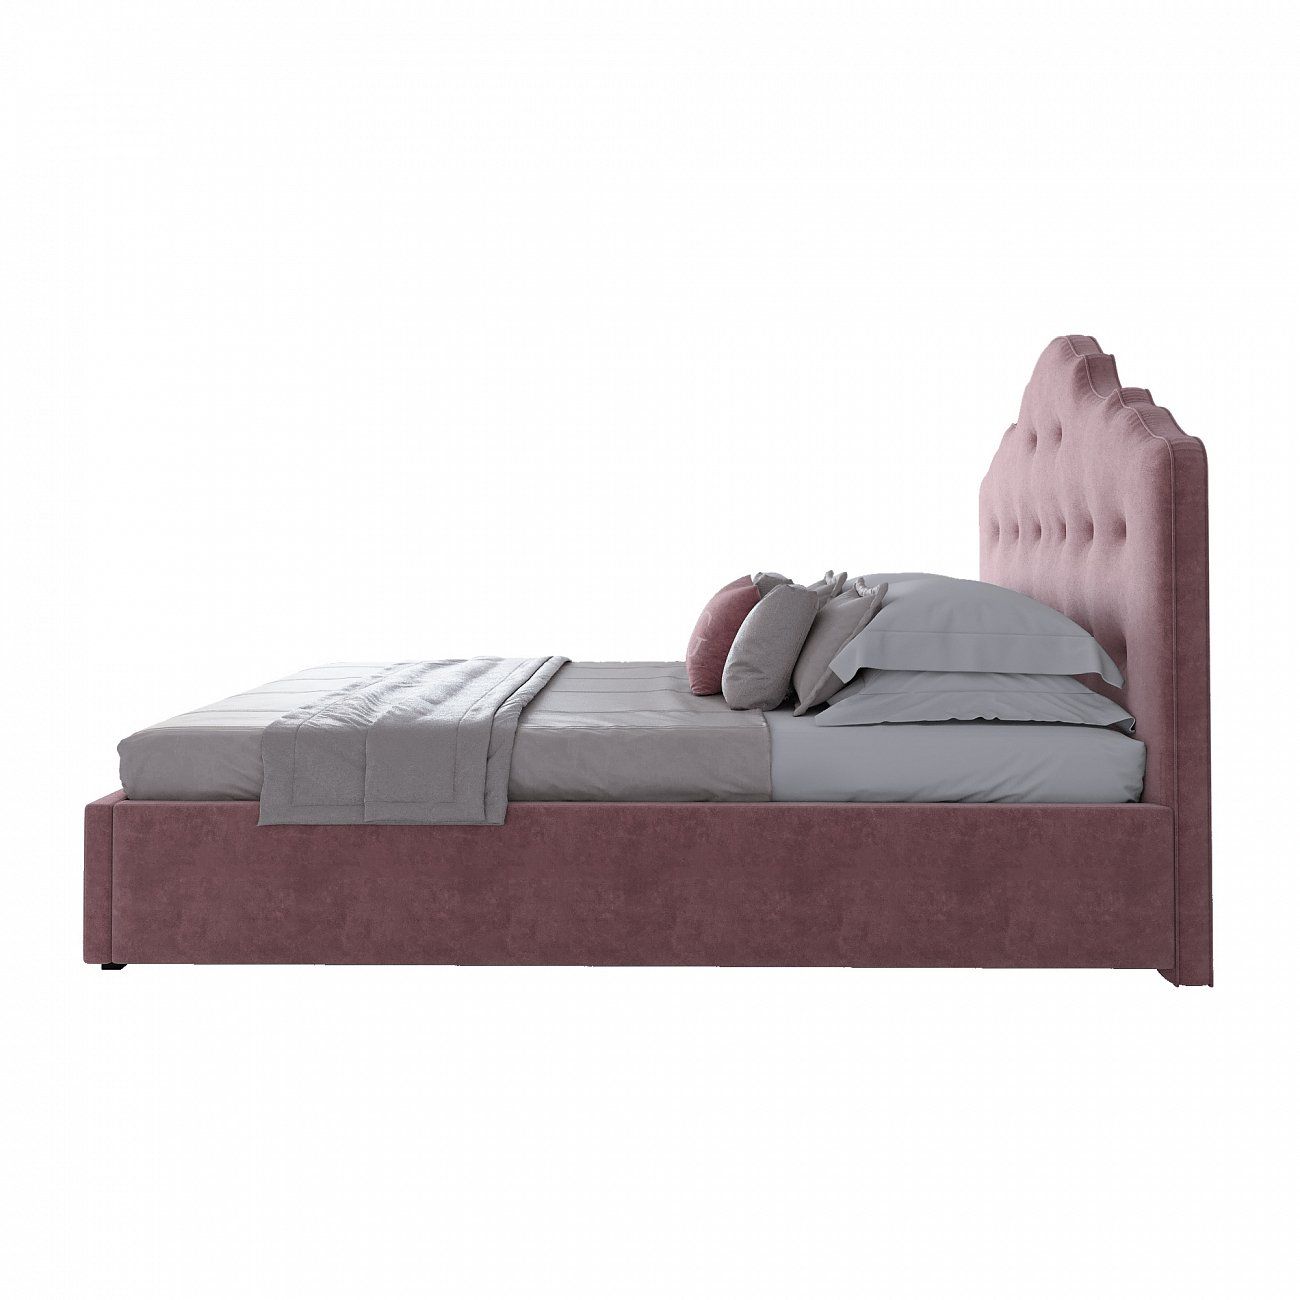 Double bed 160x200 Dusty Rose Palace